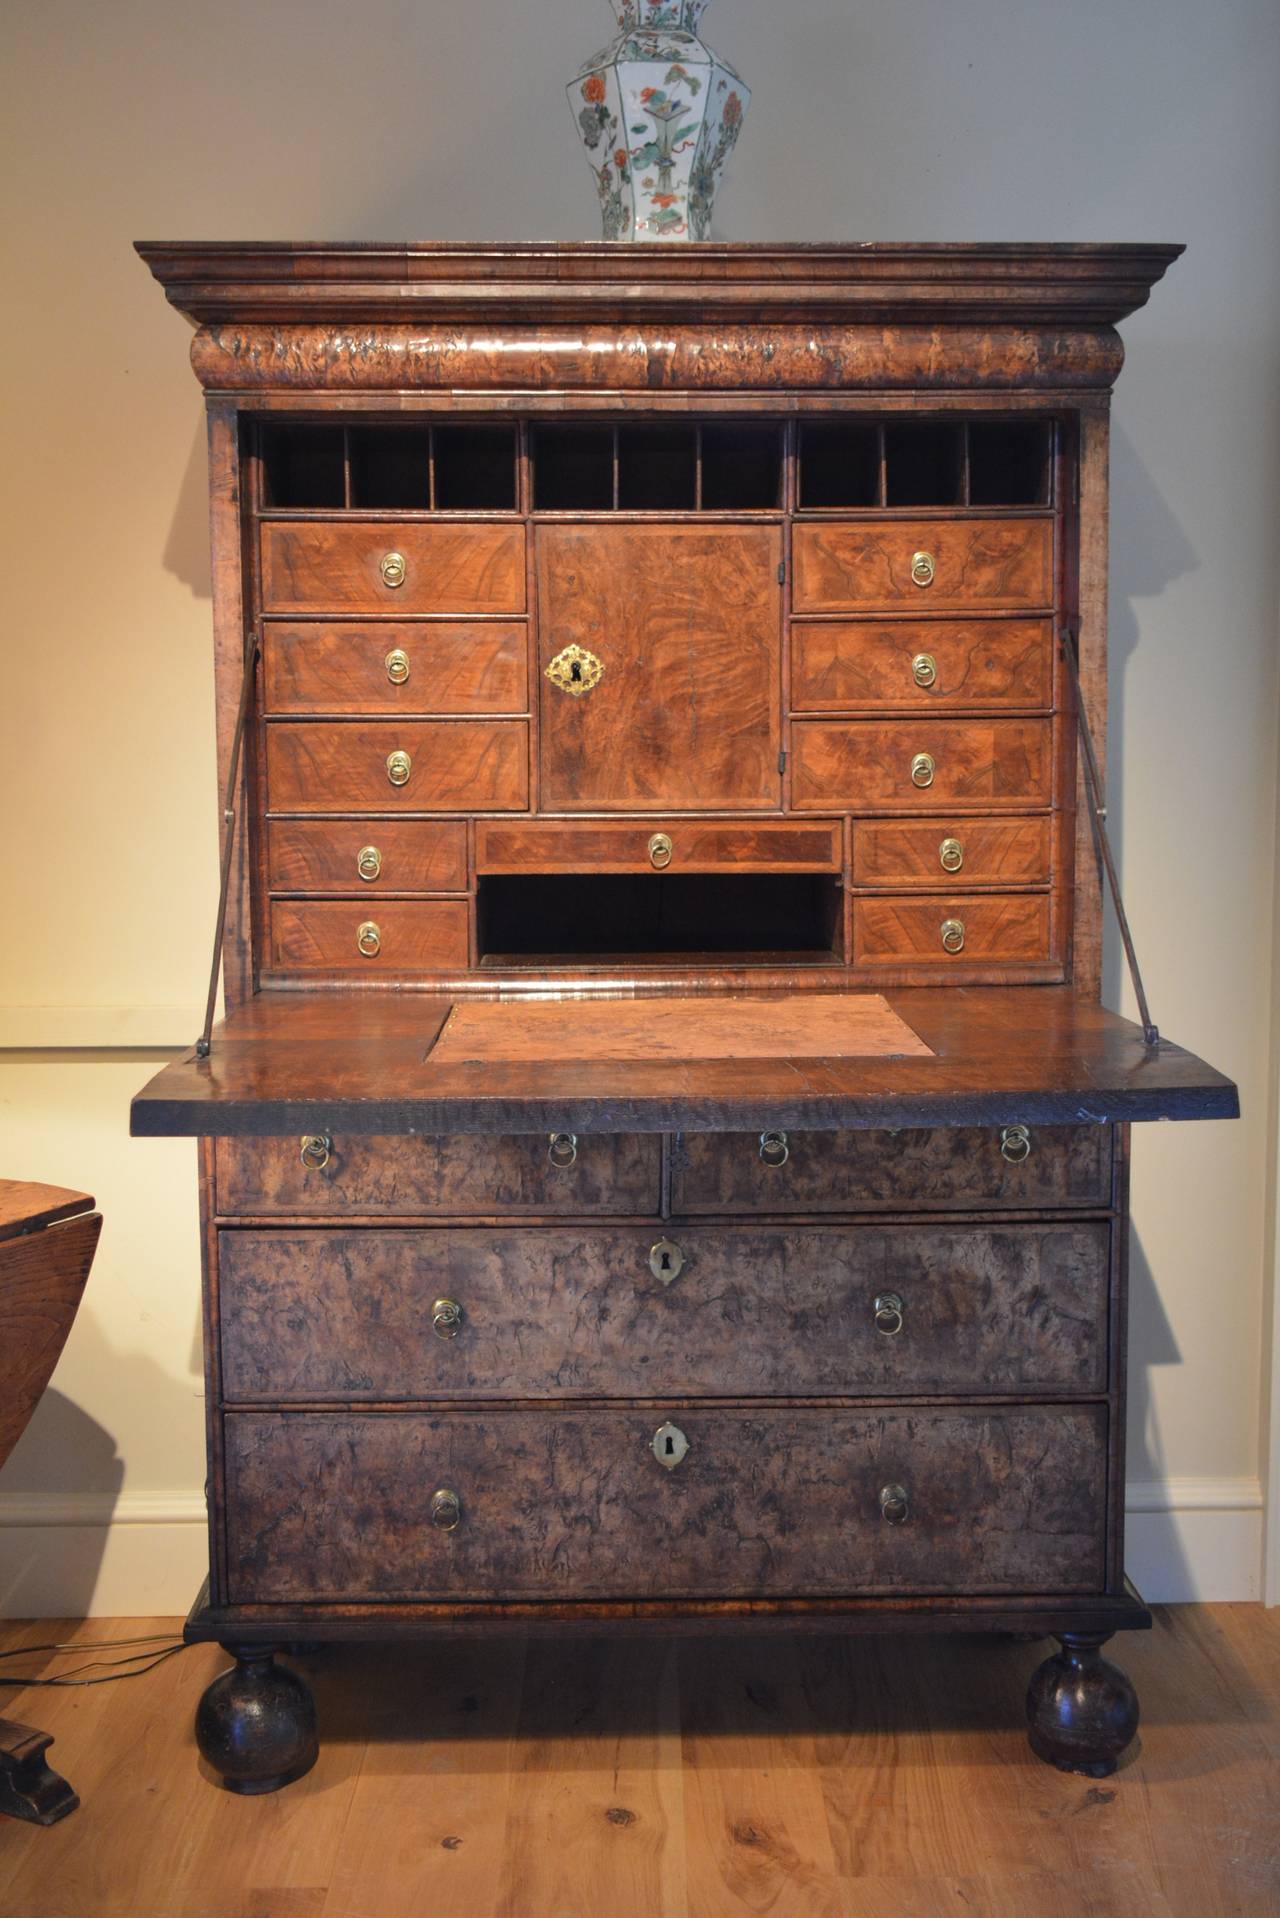 An early 18th century veneered walnut escritoire or writing cabinet of architectural form, the pulvinated frieze at the top concealing a drawer, below which the fall front opens to reveal a series of drawers and pidgeon holes around a central